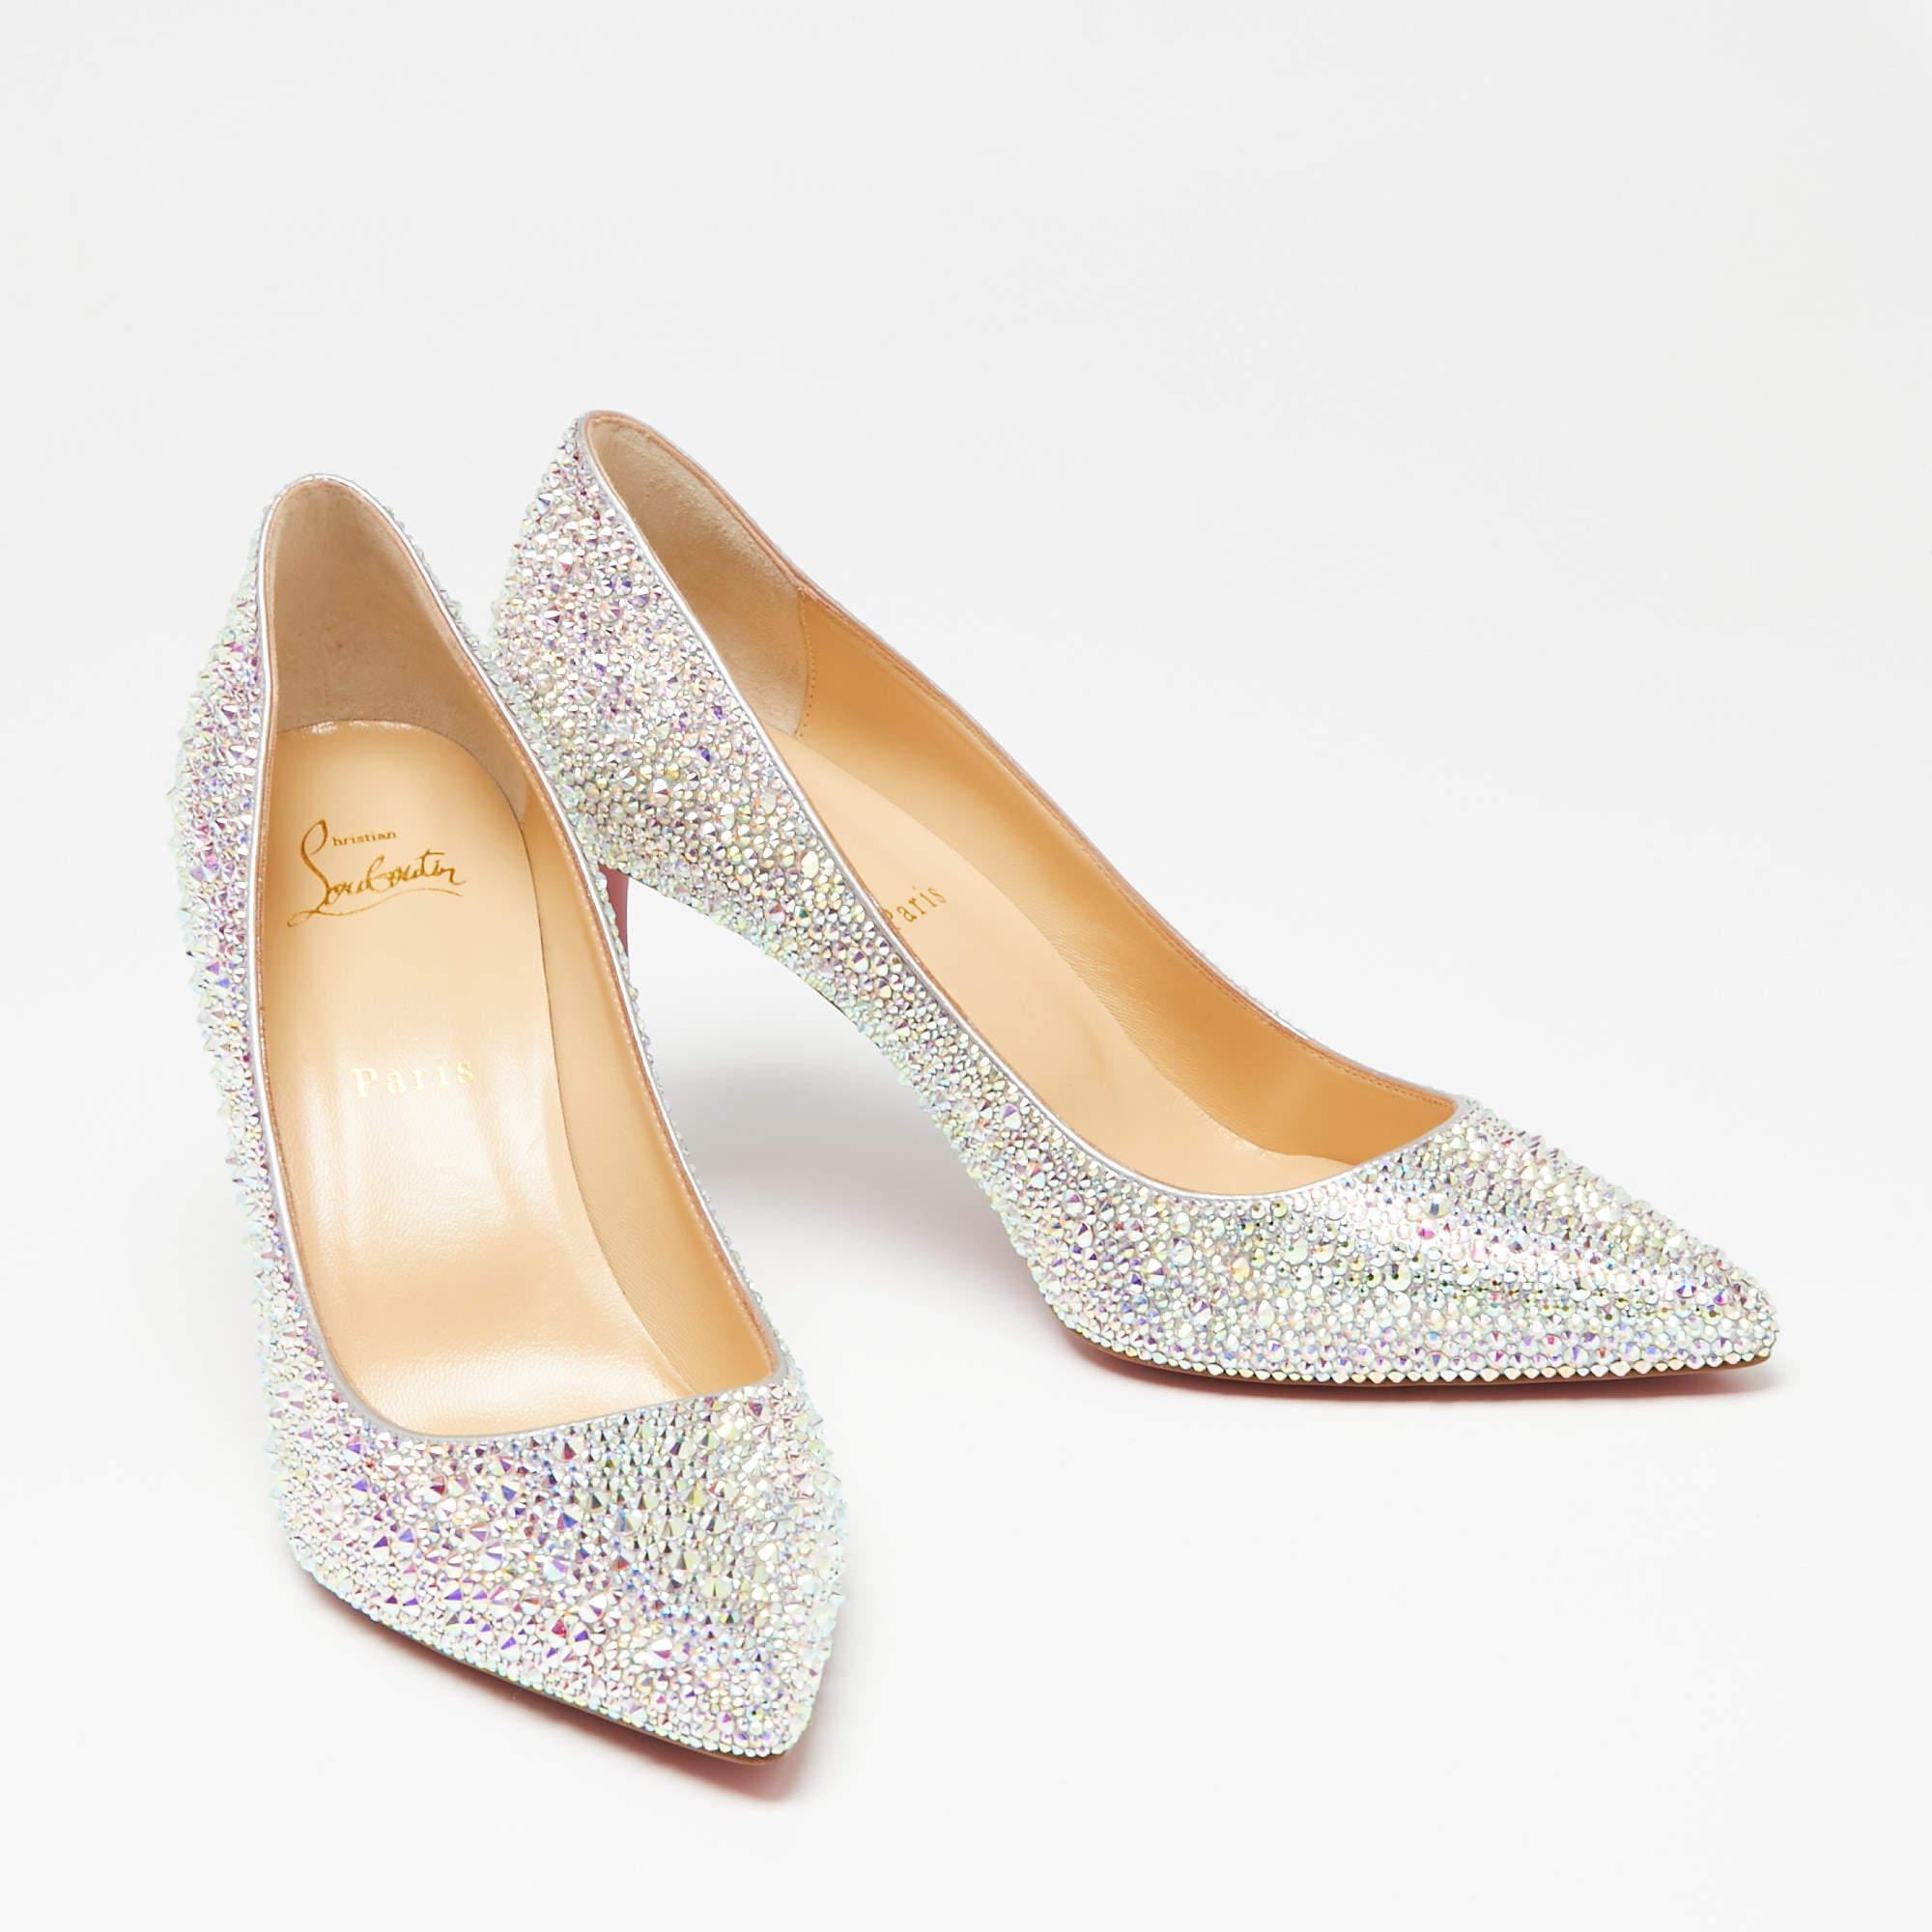 One of Christian Louboutin's most loved styles is the Kate pumps. These here are crafted in leather, flaunting a beautiful multicolored exterior with shimmering studs all over, pointed toes, and 8.5 cm high heels that create a stunning